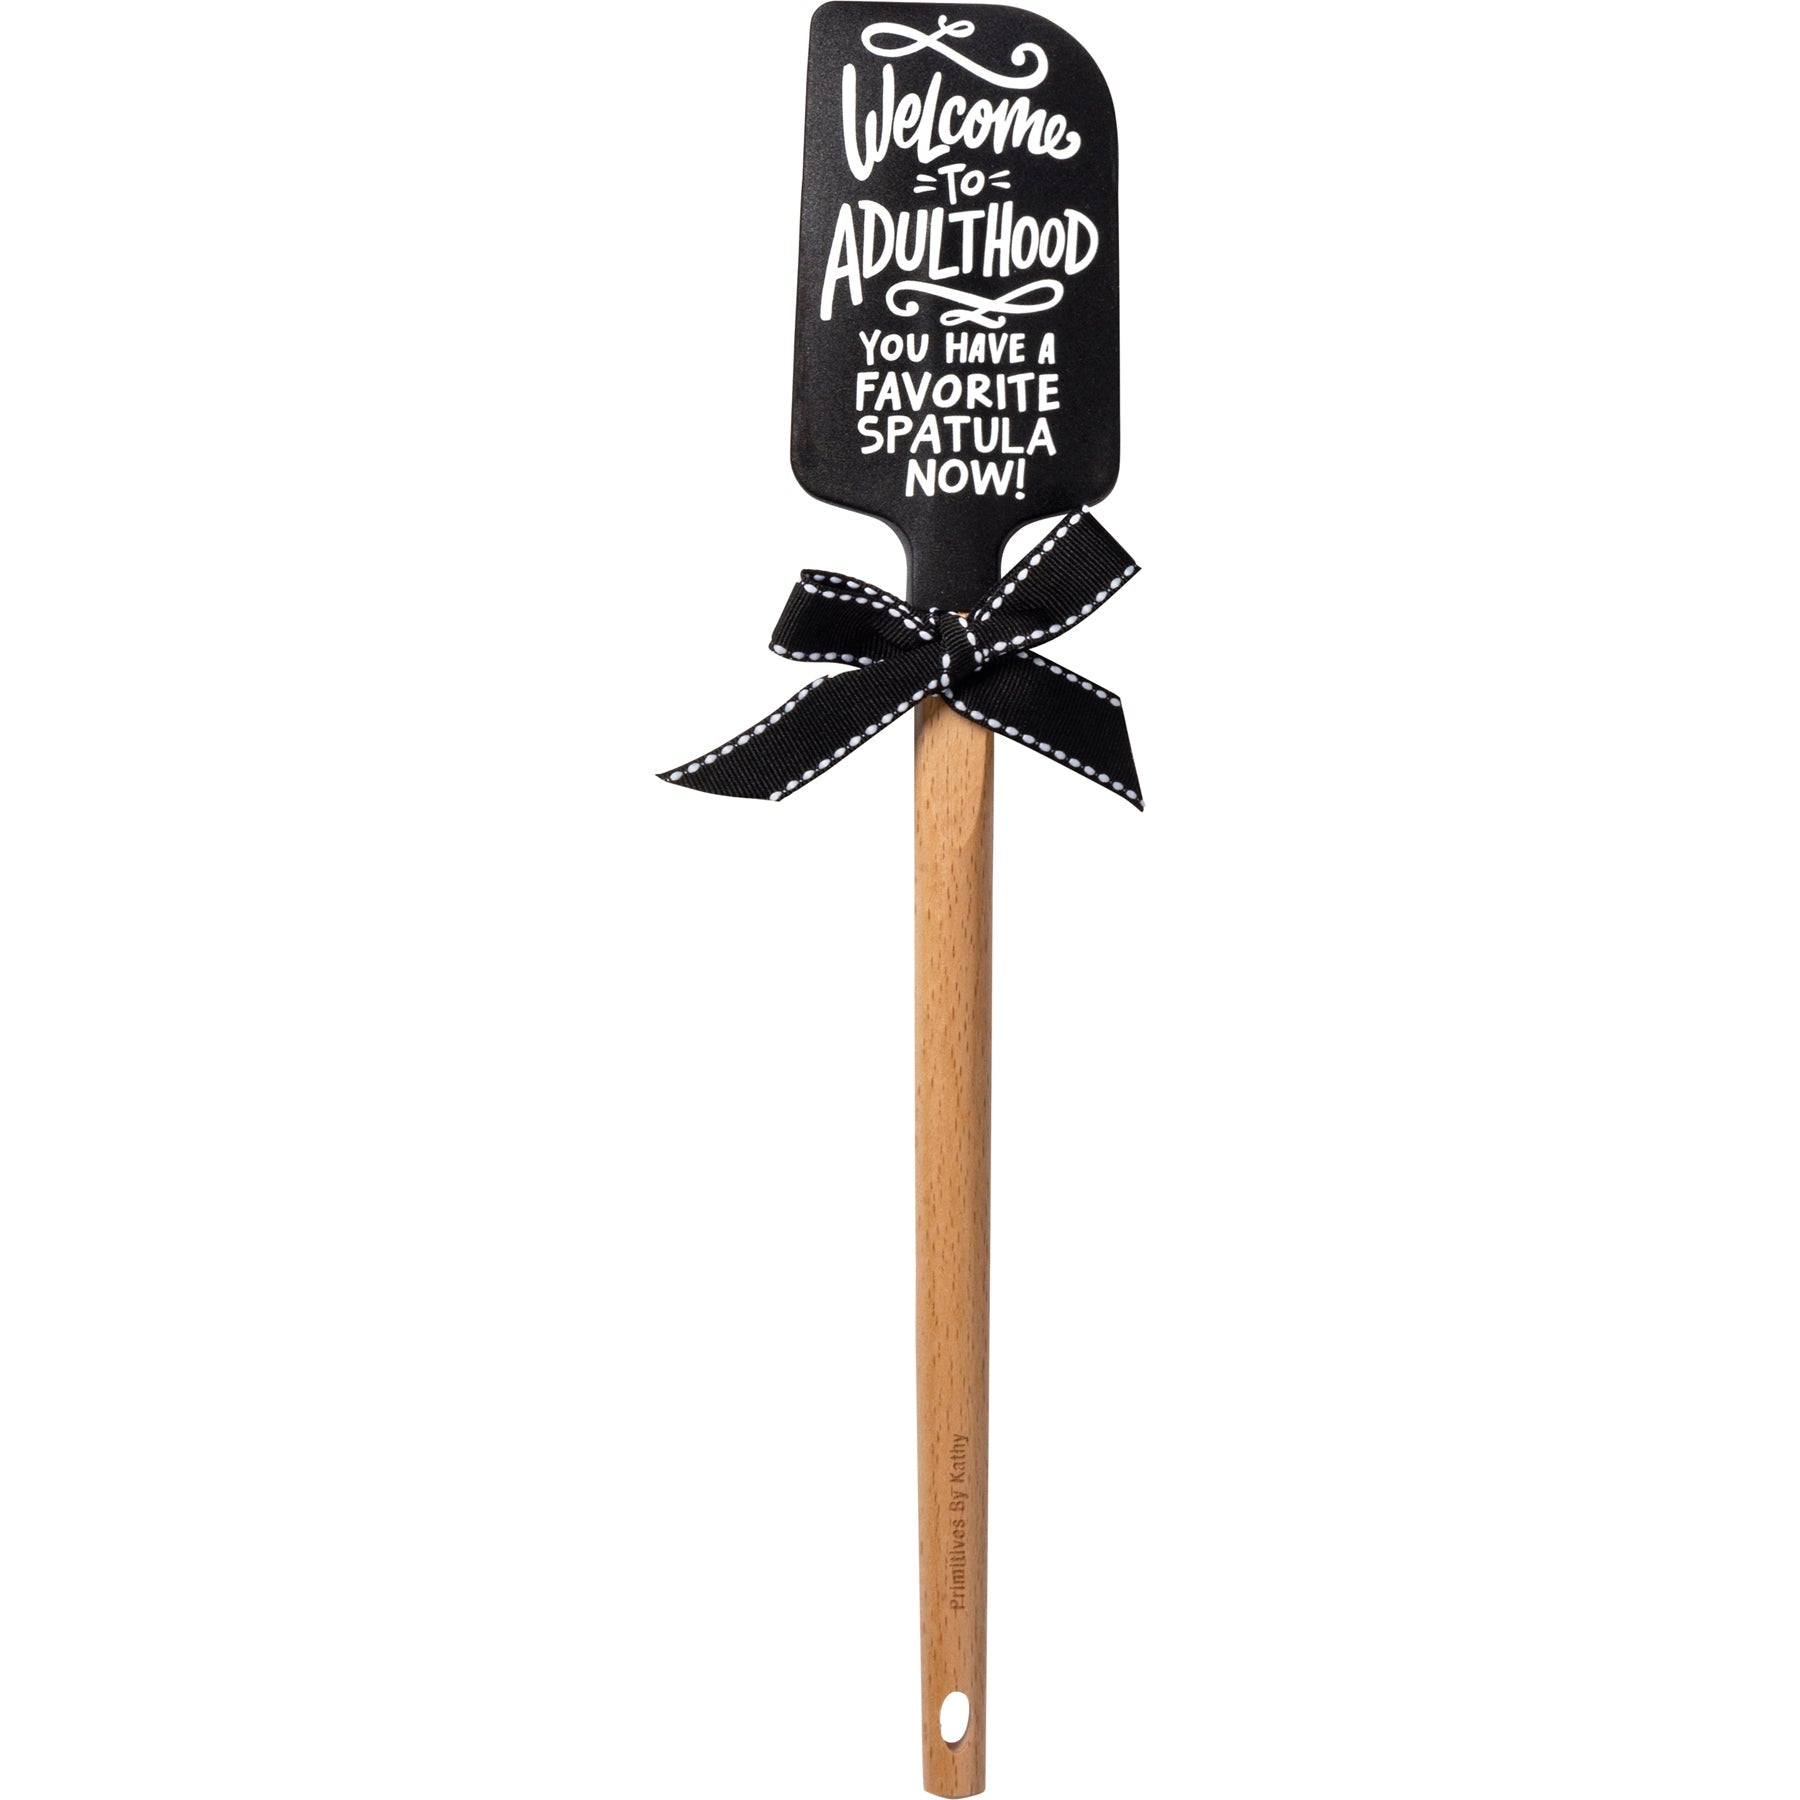 Welcome To Adulthood You Have A Favorite Spatula Now Wooden Handle + Dish Towel Gift Set Bundle